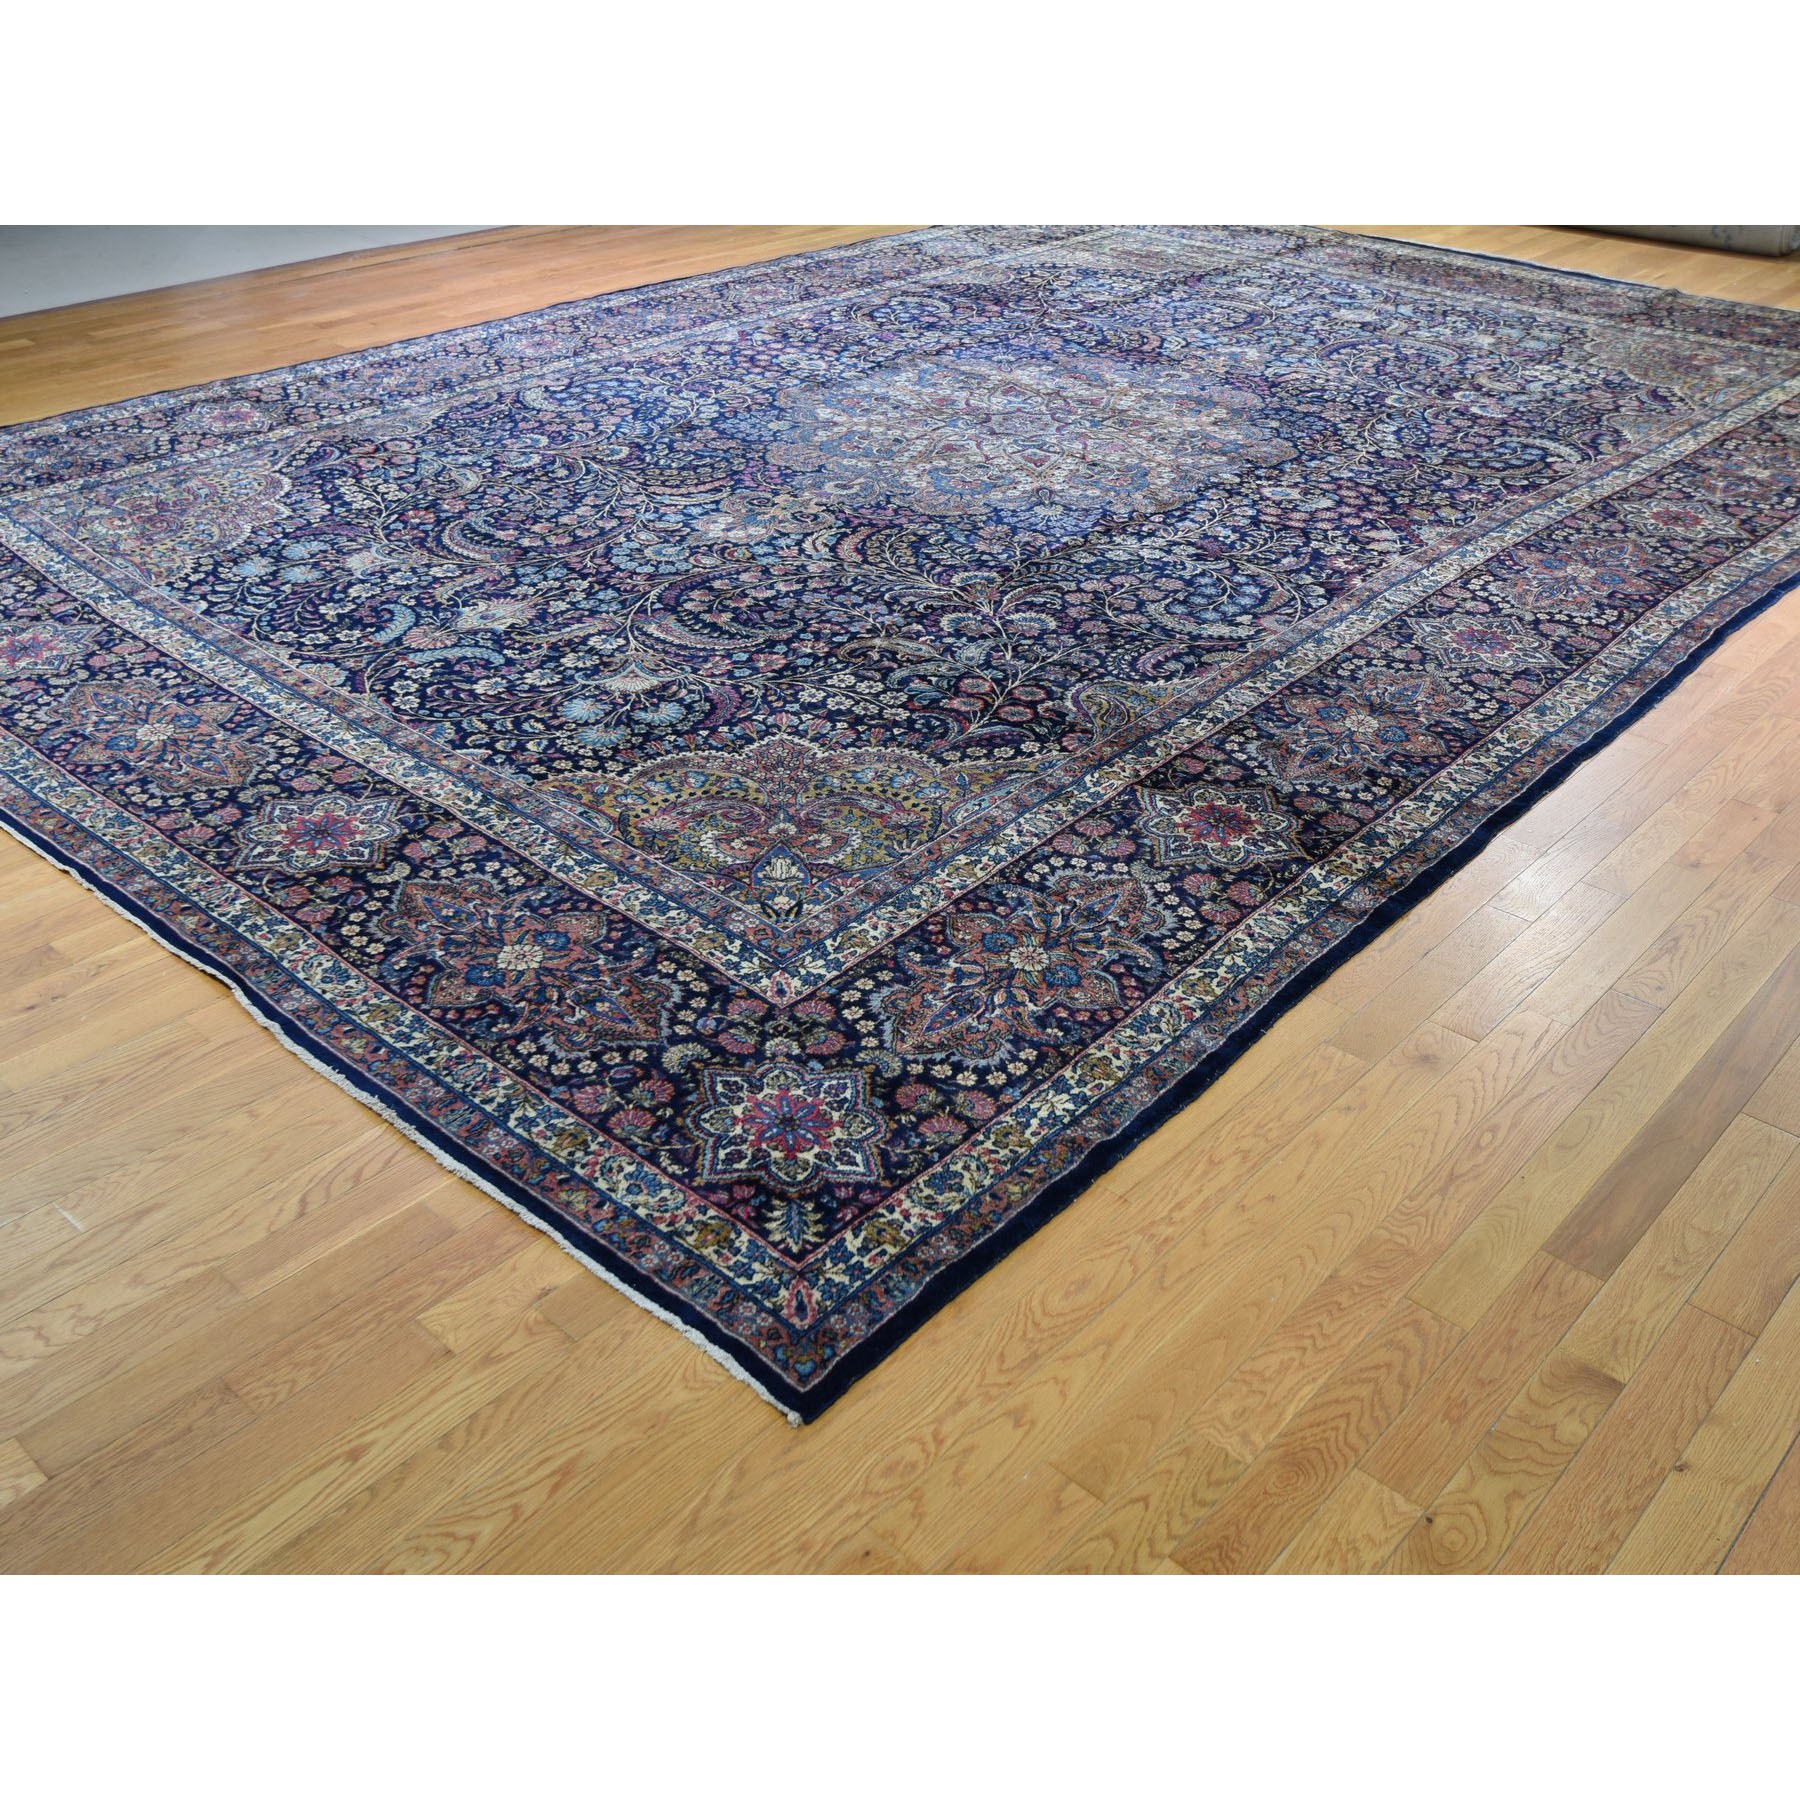 13-4 x19-7  Oversized Antique Persian Kerman Full Pile And Soft Hand Knotted Oriental Rug 